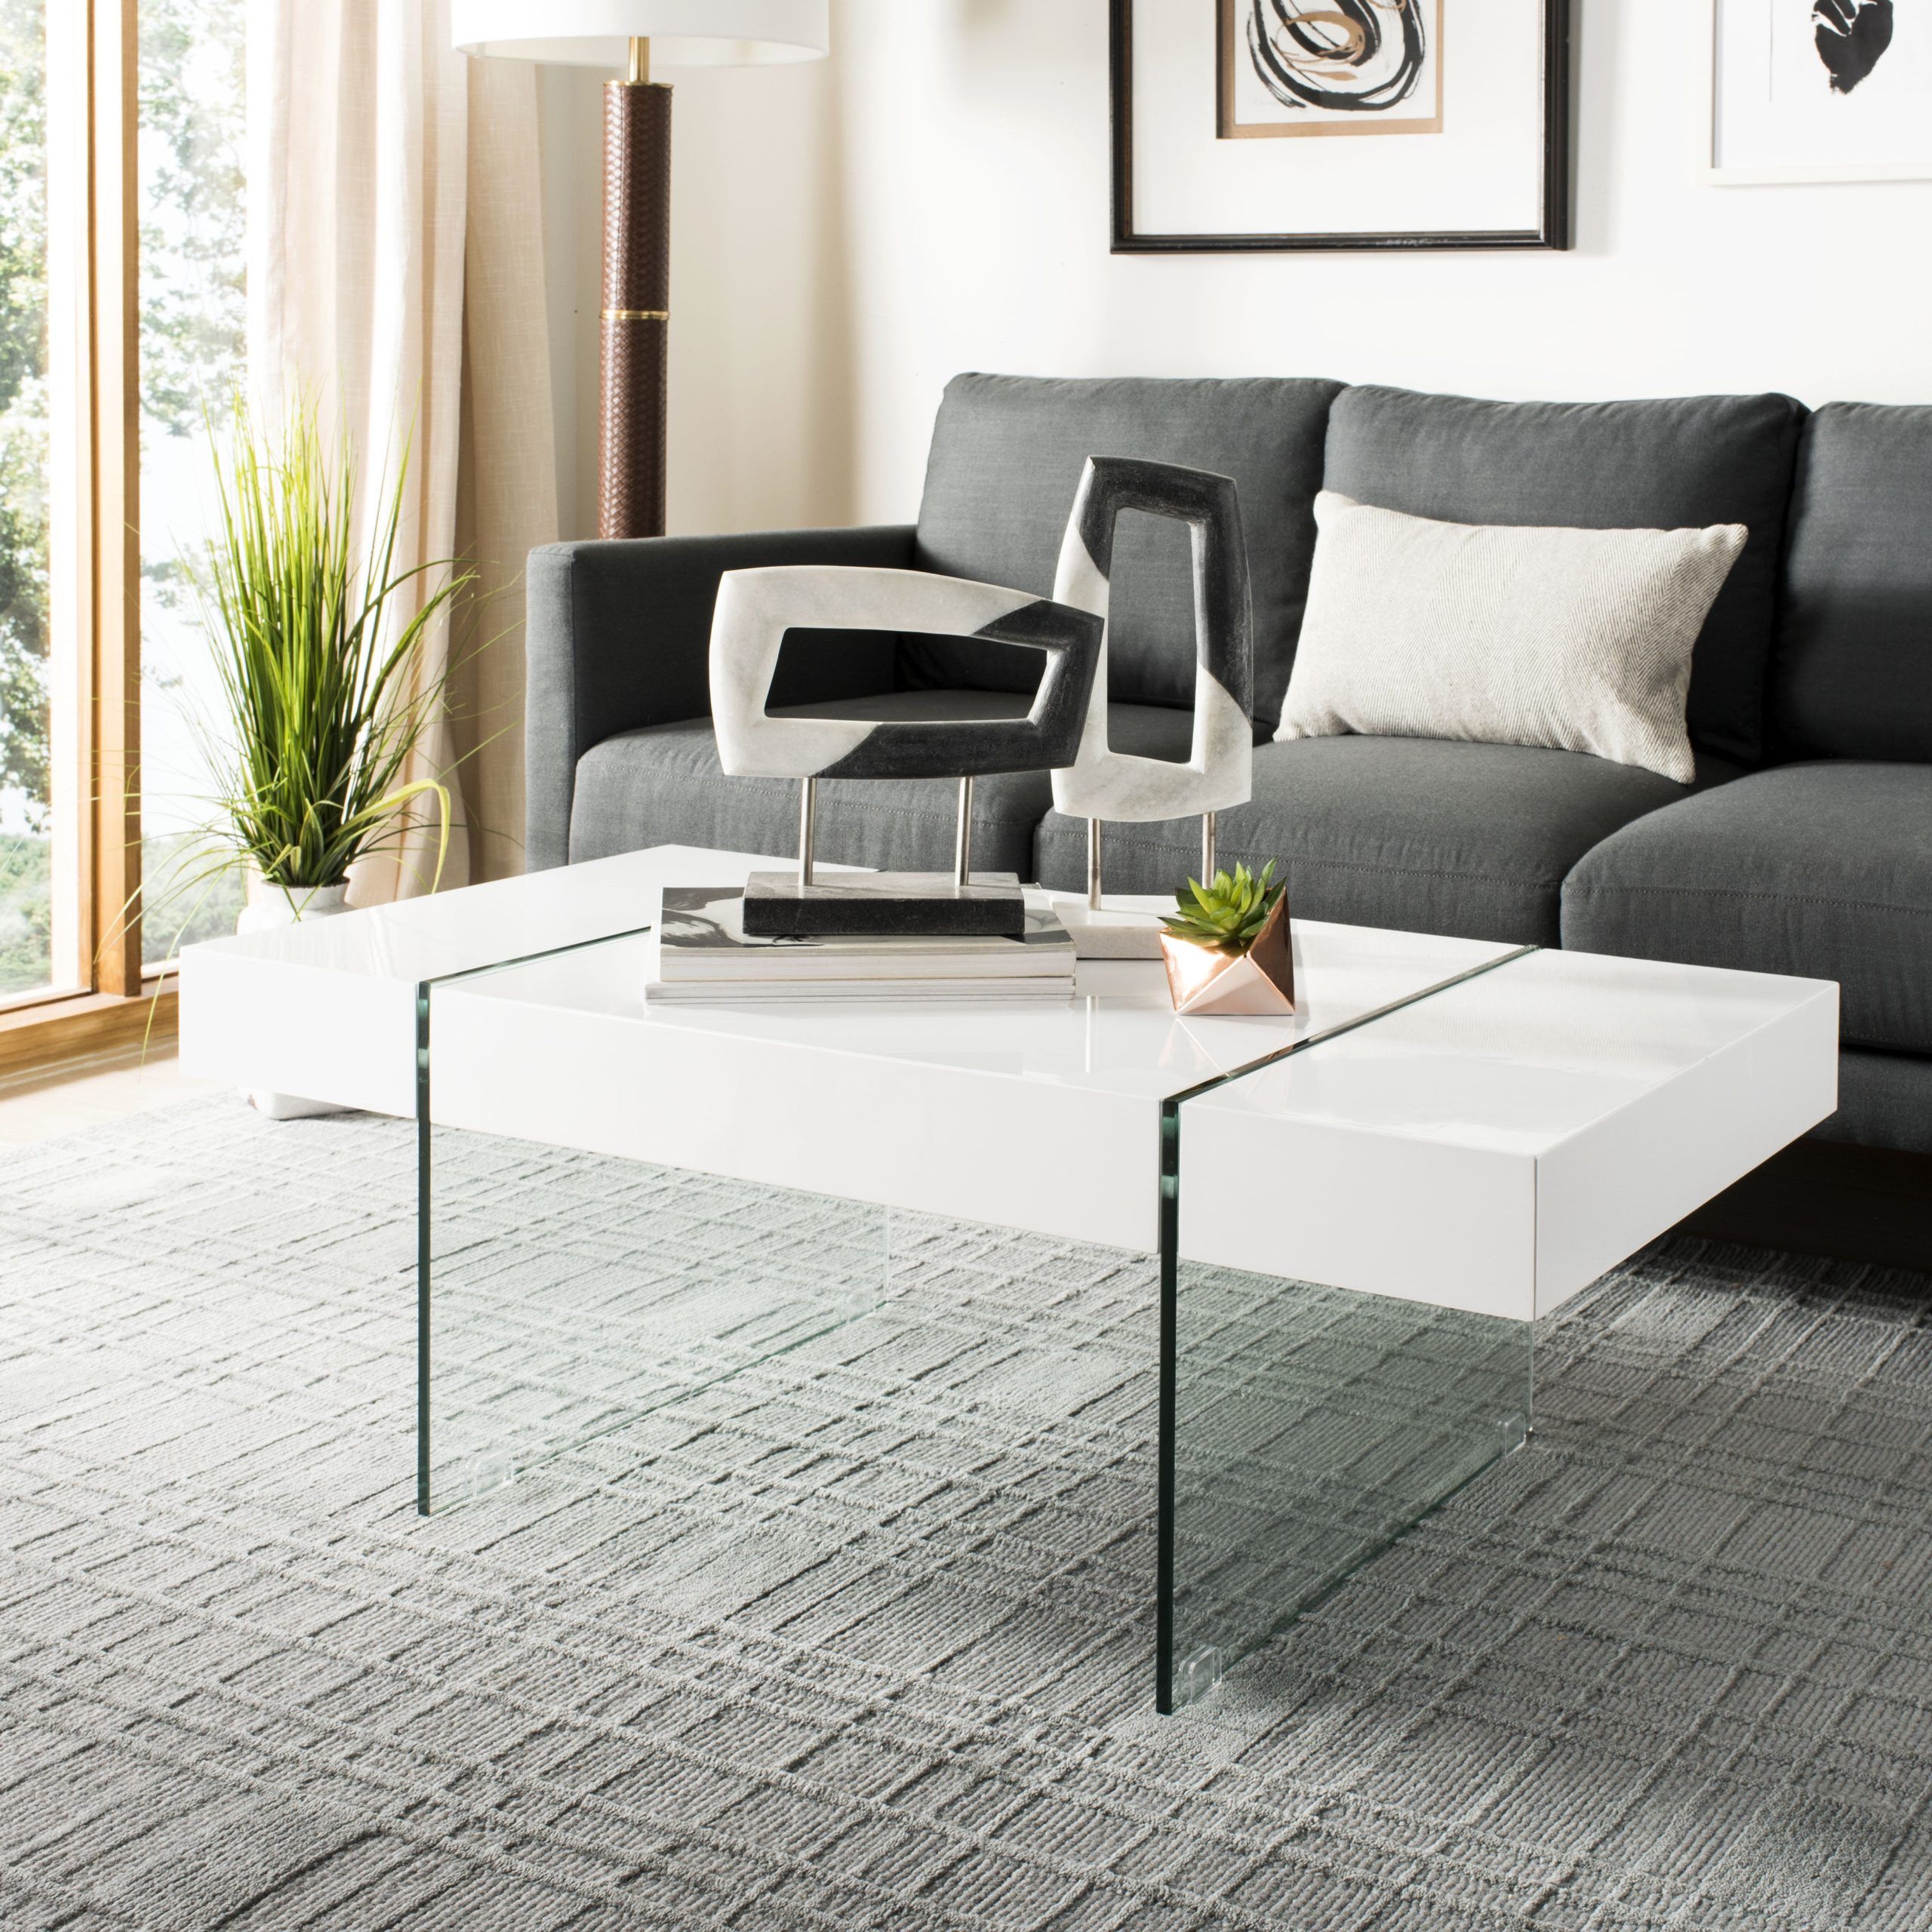 Recent Safavieh Jacob Rectangular Glass Leg Modern Coffee Table – Walmart With Regard To Clear Rectangle Center Coffee Tables (View 7 of 15)